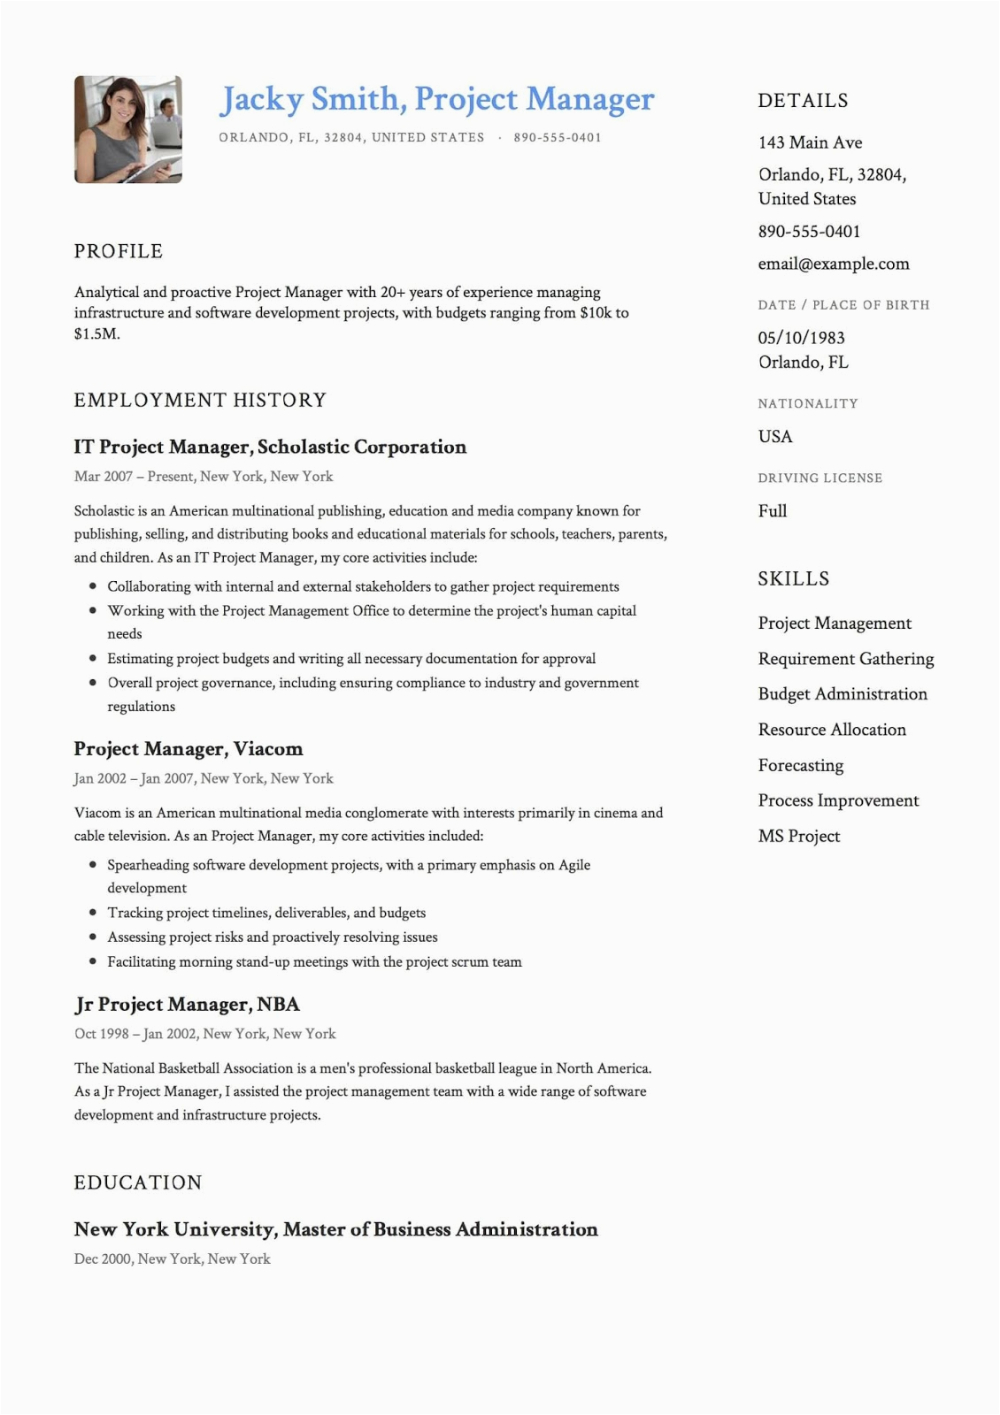 Project Manager Resume Sample Doc India It Project Manager Resume Sample Doc Best Resume Examples